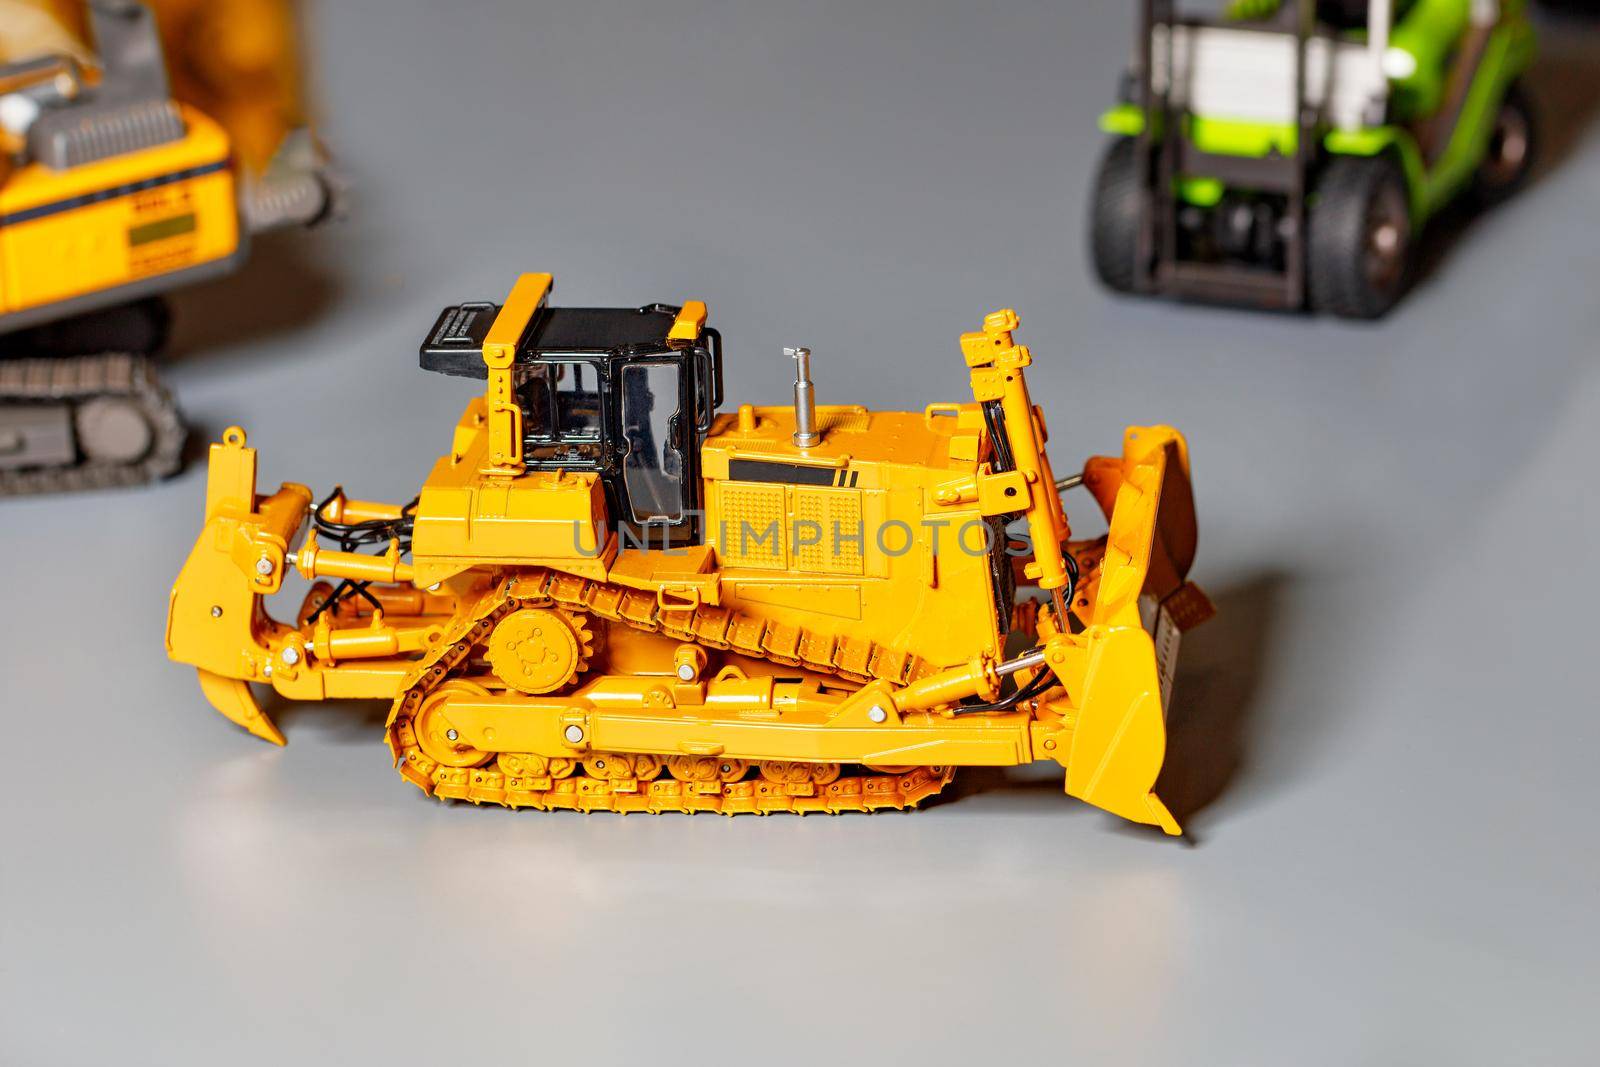 Toy model of a yellow construction bulldozer on a light gray background, selective focus, copy space.